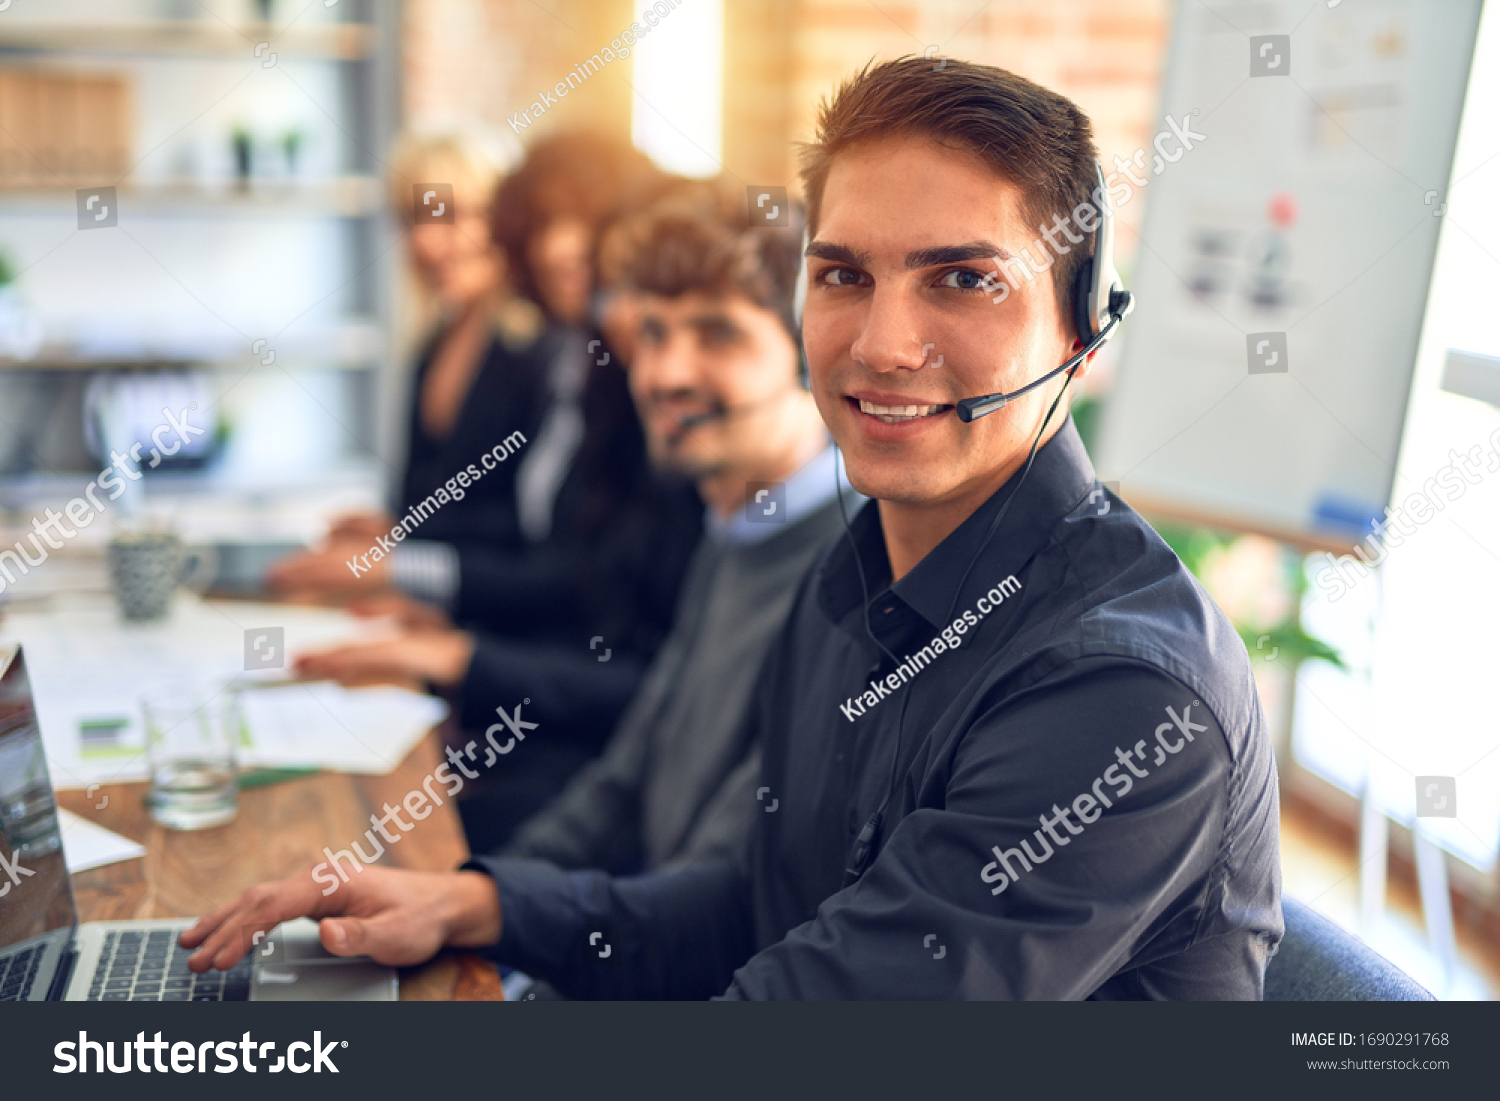 Group of call center workers working together with smile on face using headset. Young handsome man smiling at the office. #1690291768